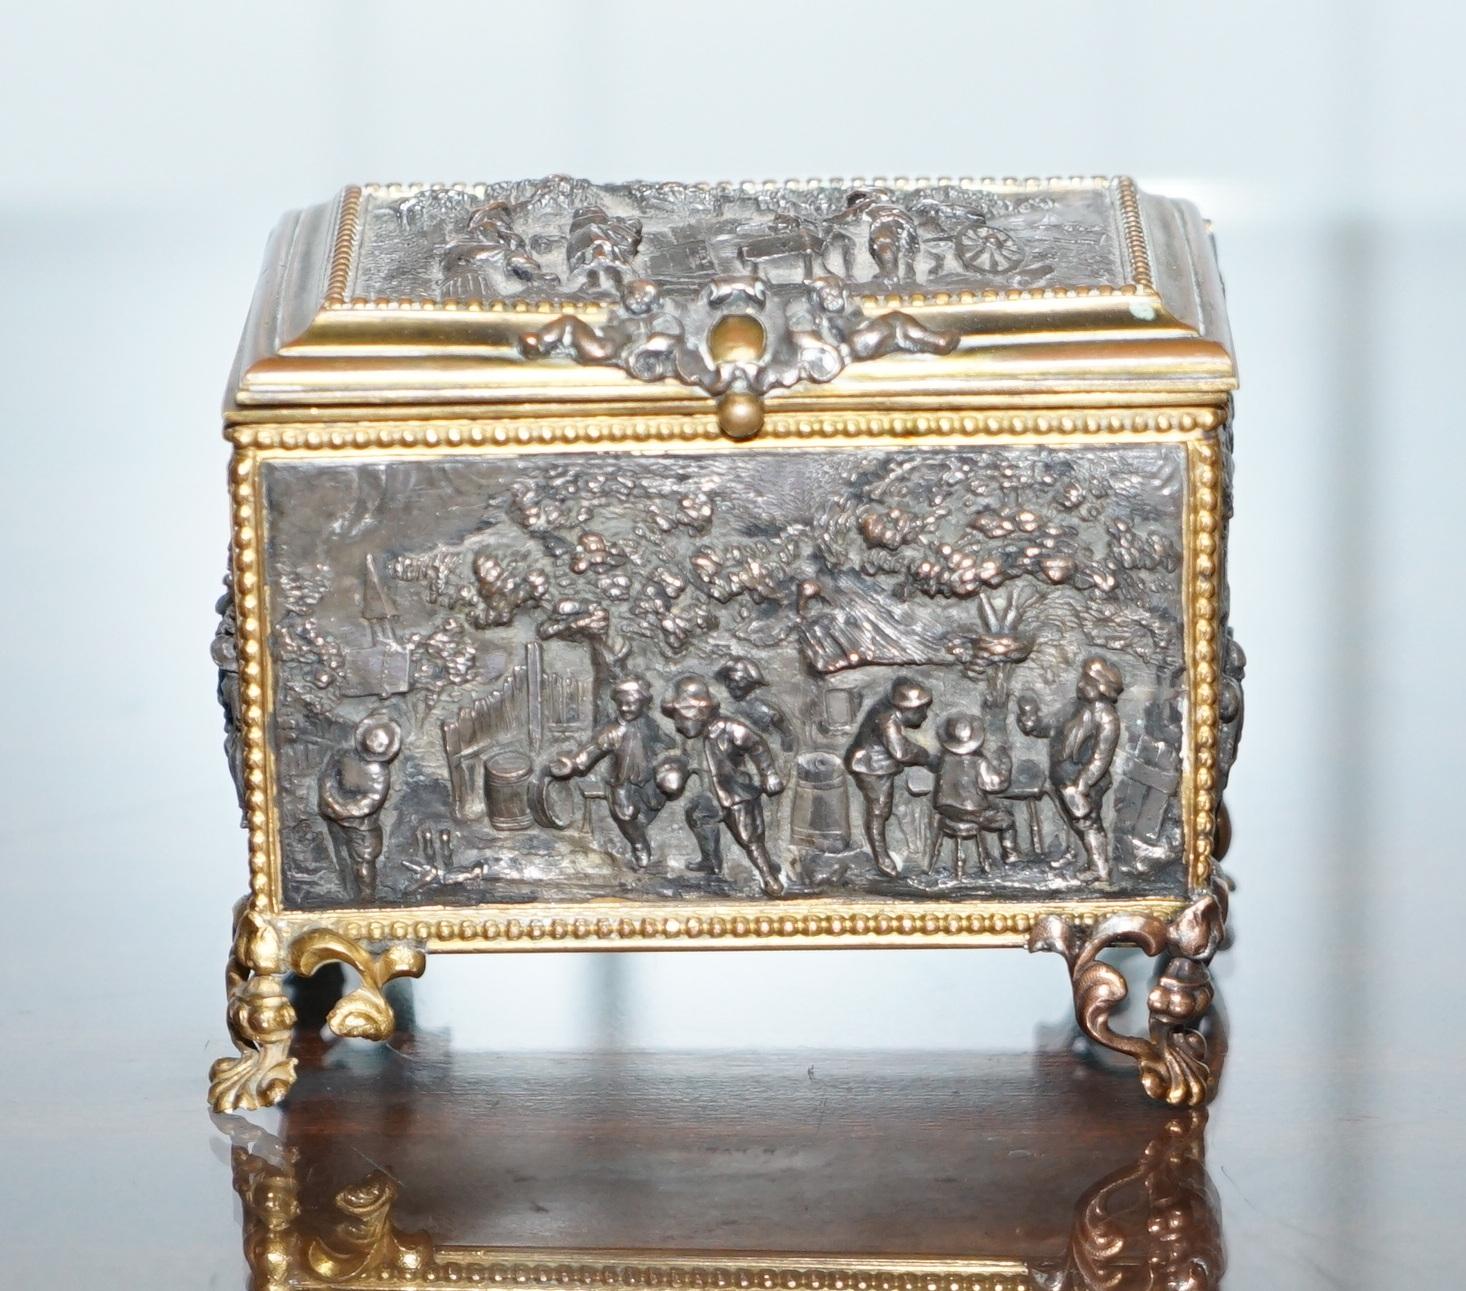 Wimbledon-Furniture

Wimbledon-Furniture is delighted to offer for sale this sublime AB Paris bronze Jewellery casket box with blue silk lining

A very well made and decorative trinket box, complete with the original blue silk lining. Every panel